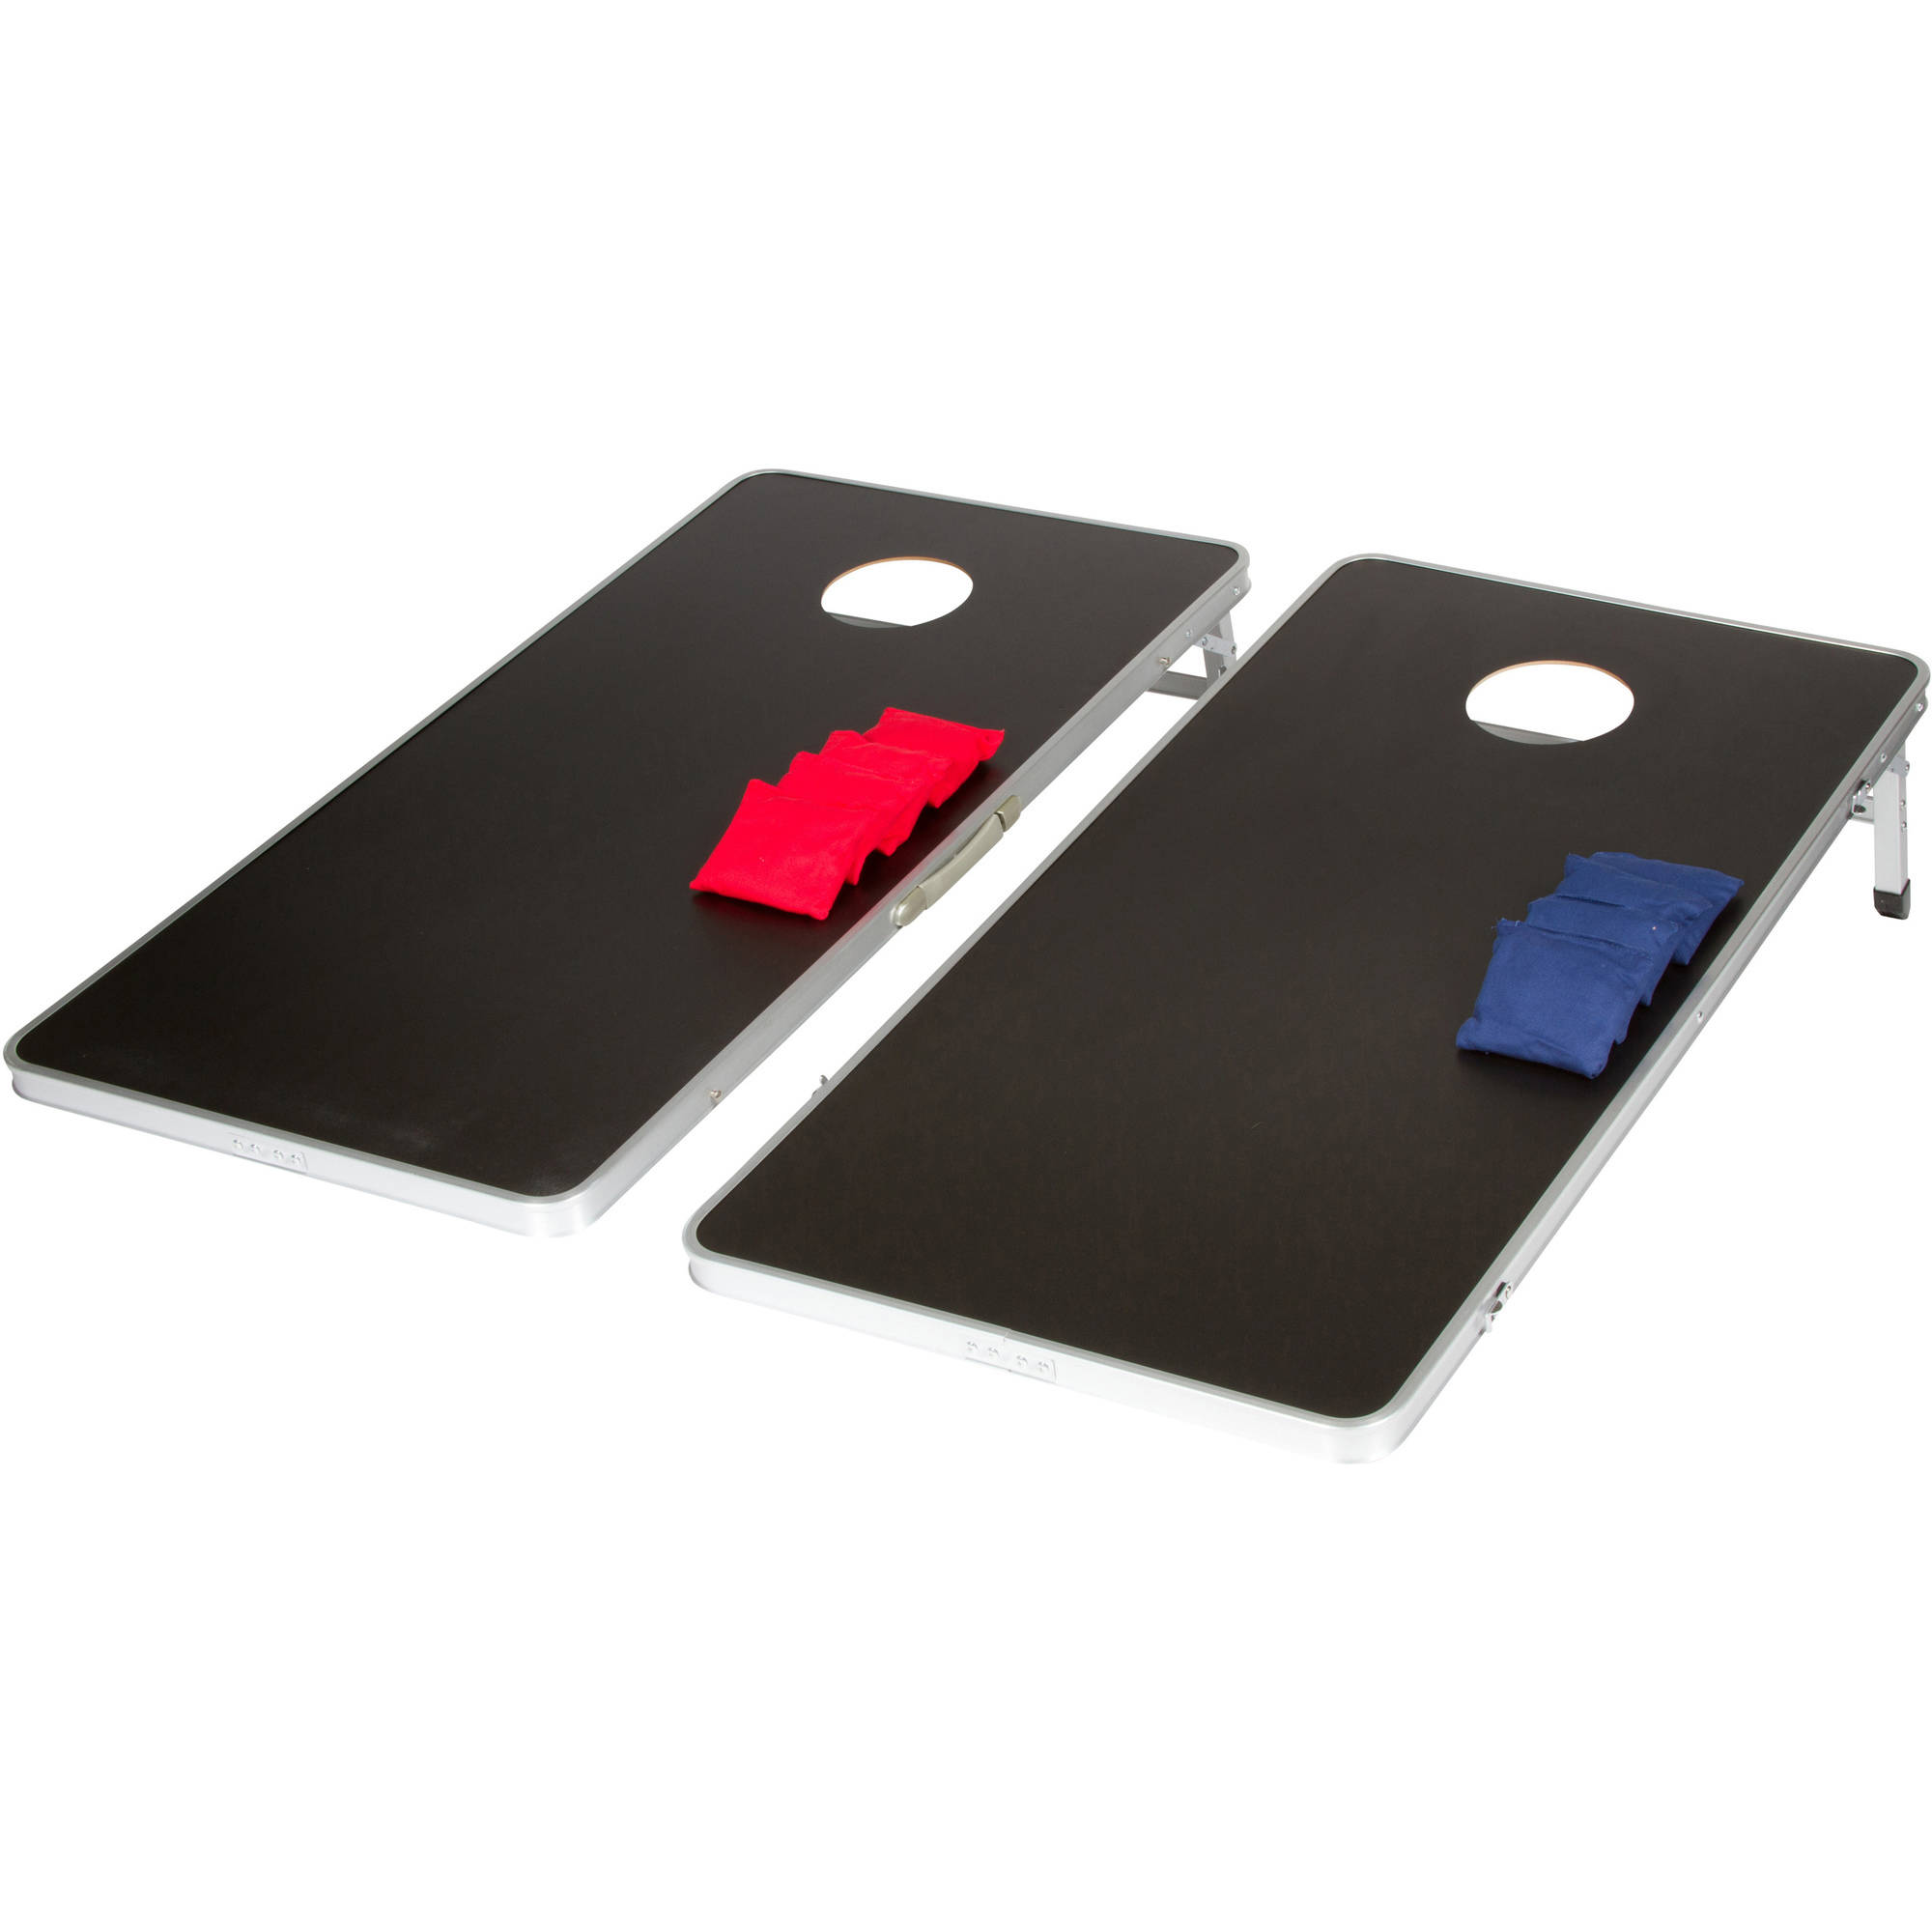 Portable Regulation Size Bean Bag and Corn Hole Toss Set, Lightweight and Portable Aluminum - image 1 of 2